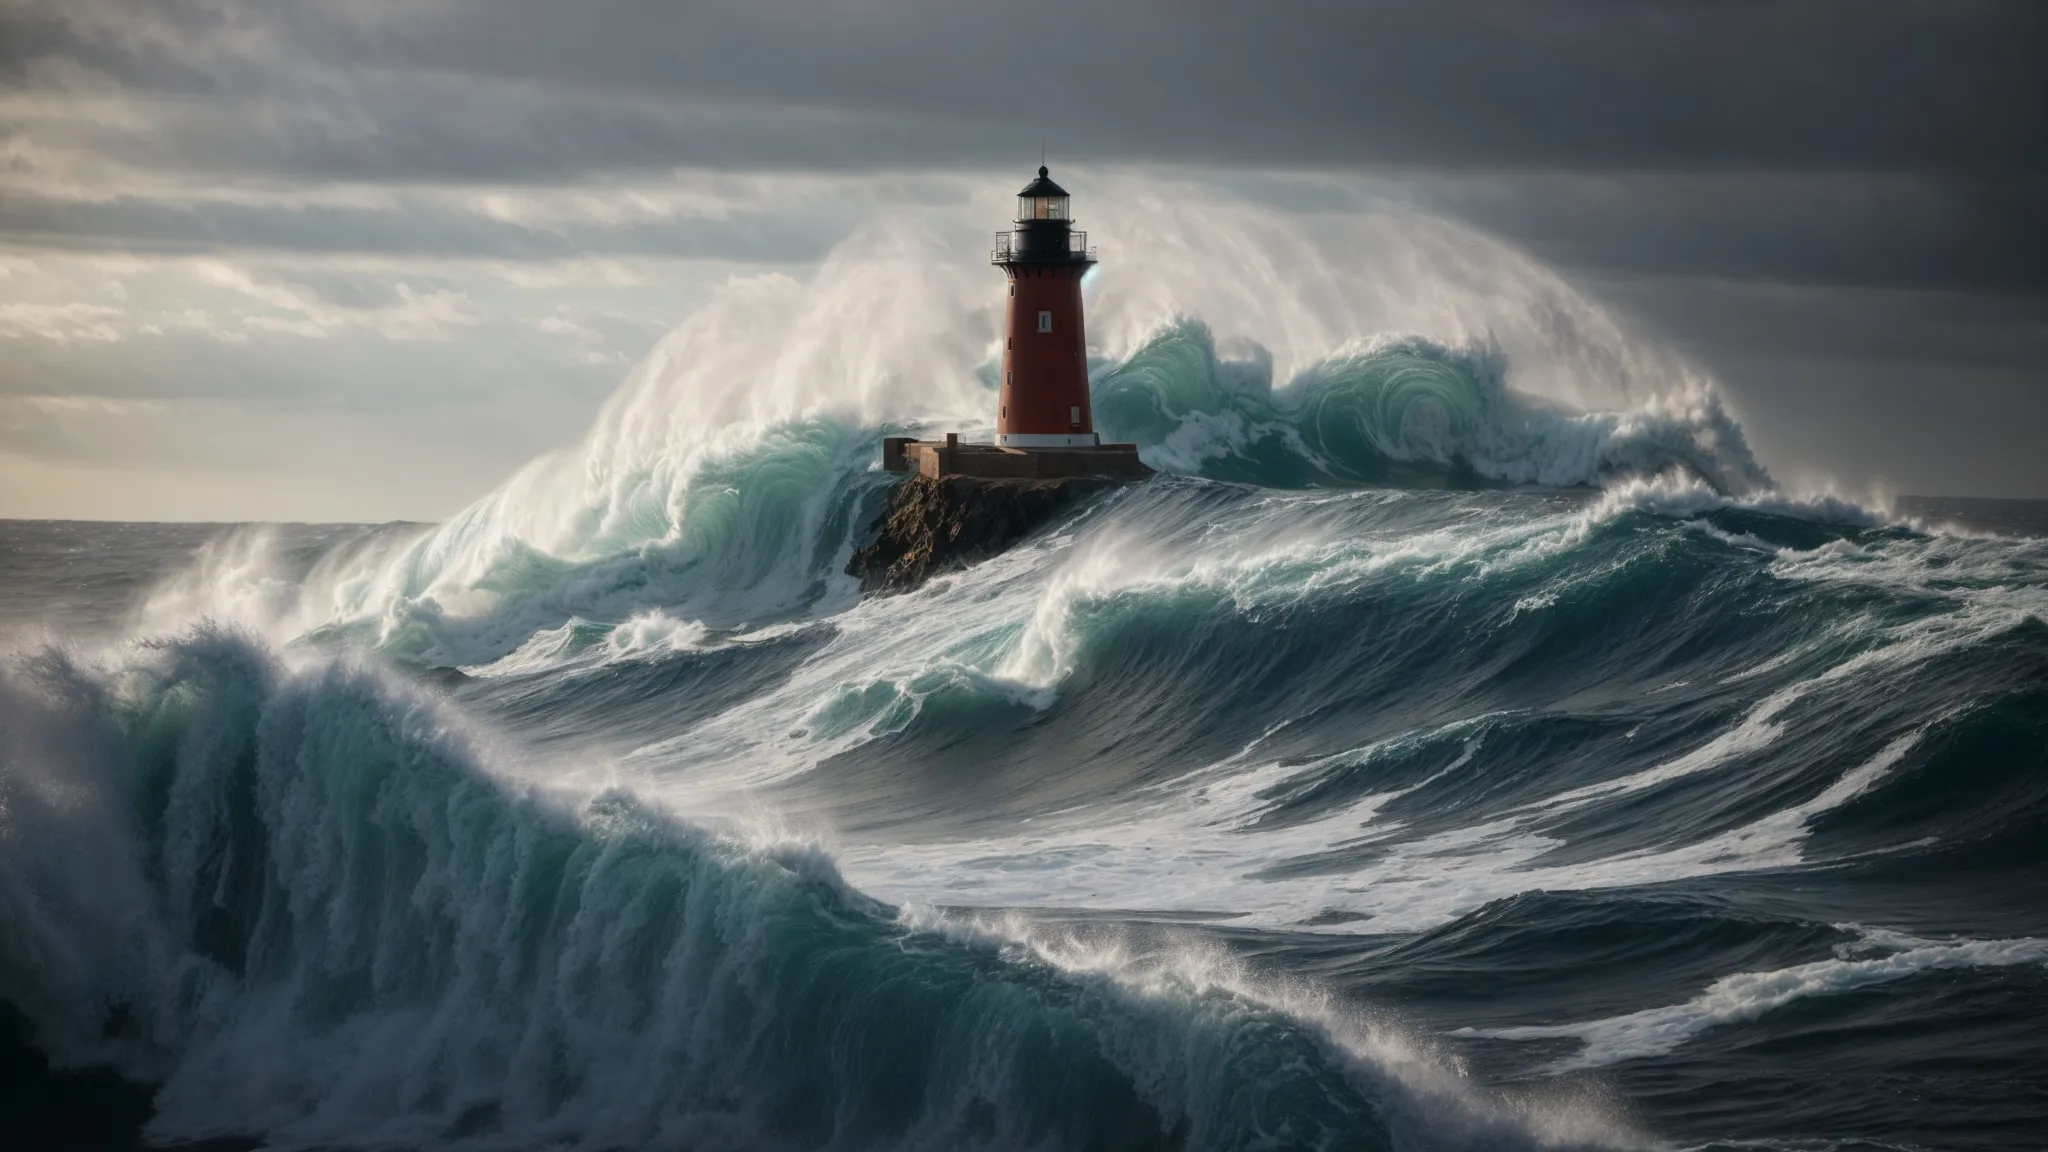 a lighthouse standing firm amidst turbulent sea waves.